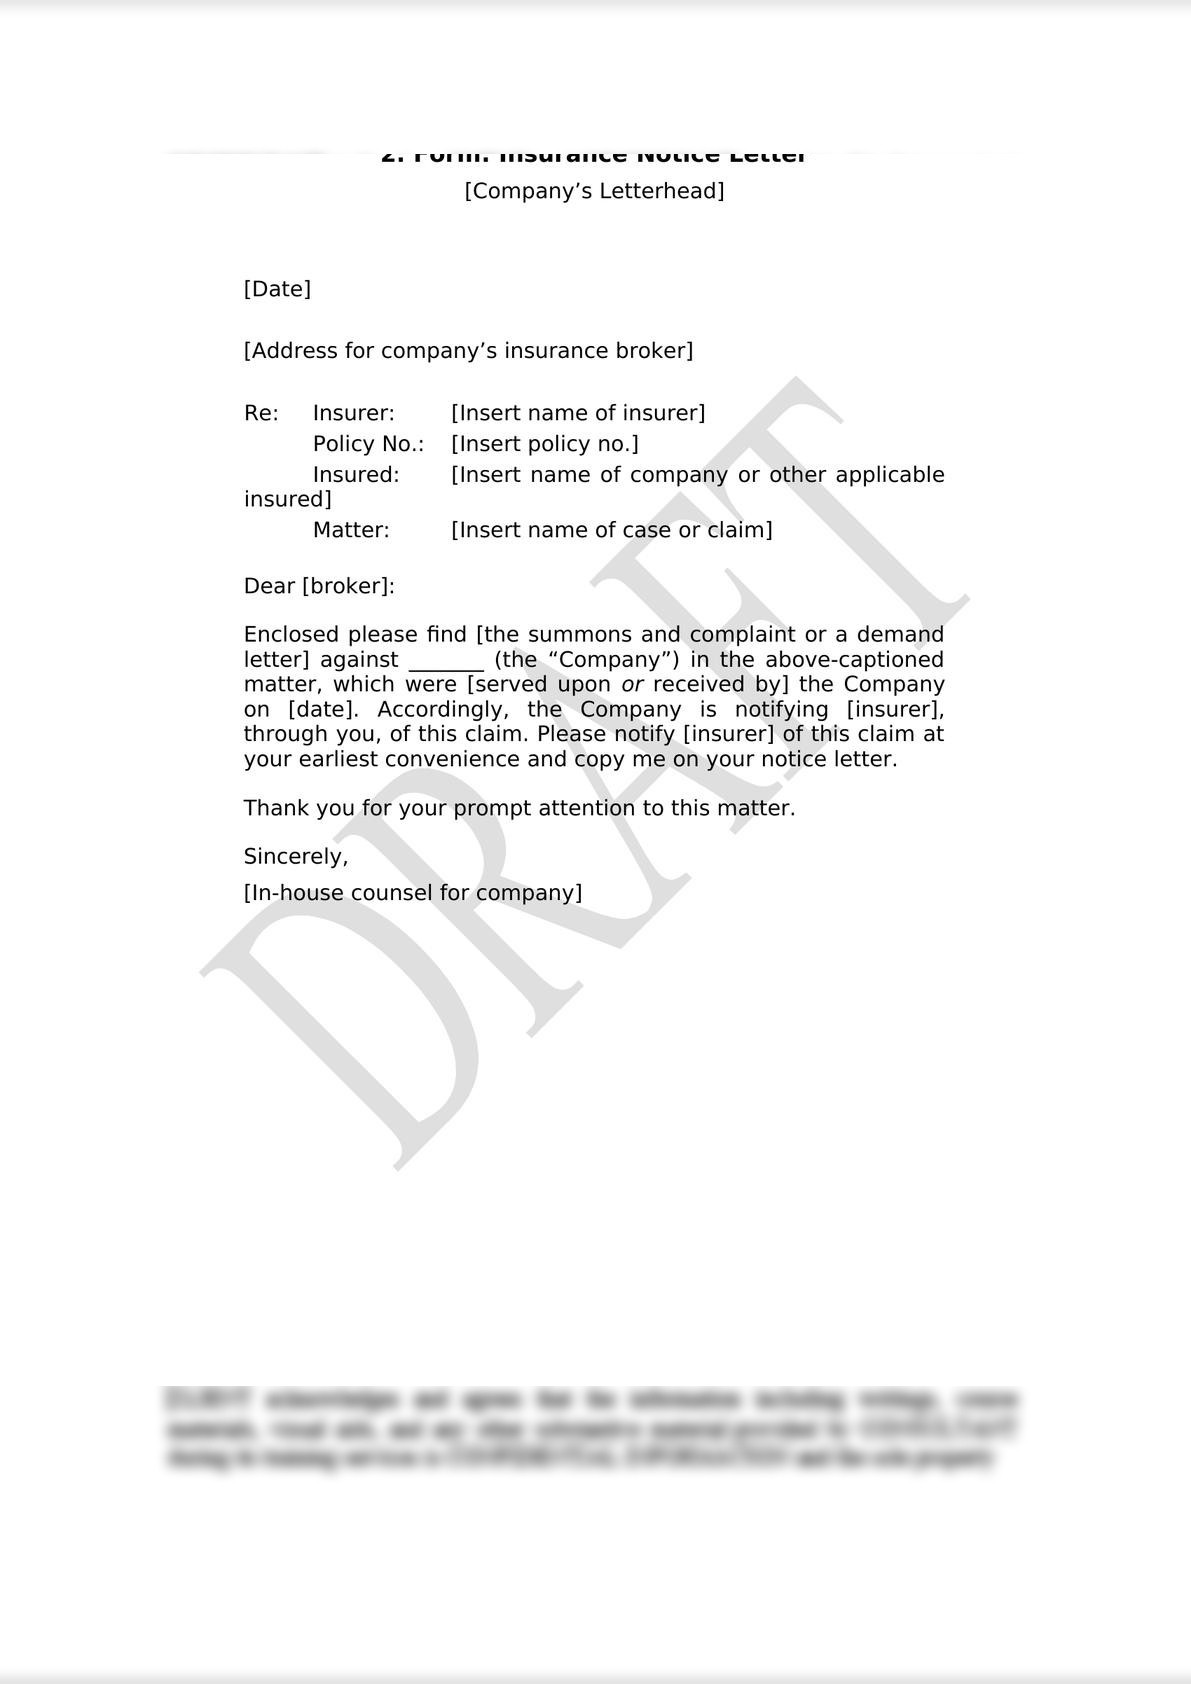 Insurance Notice Letter (Addressed by Company to its Insurer)-0